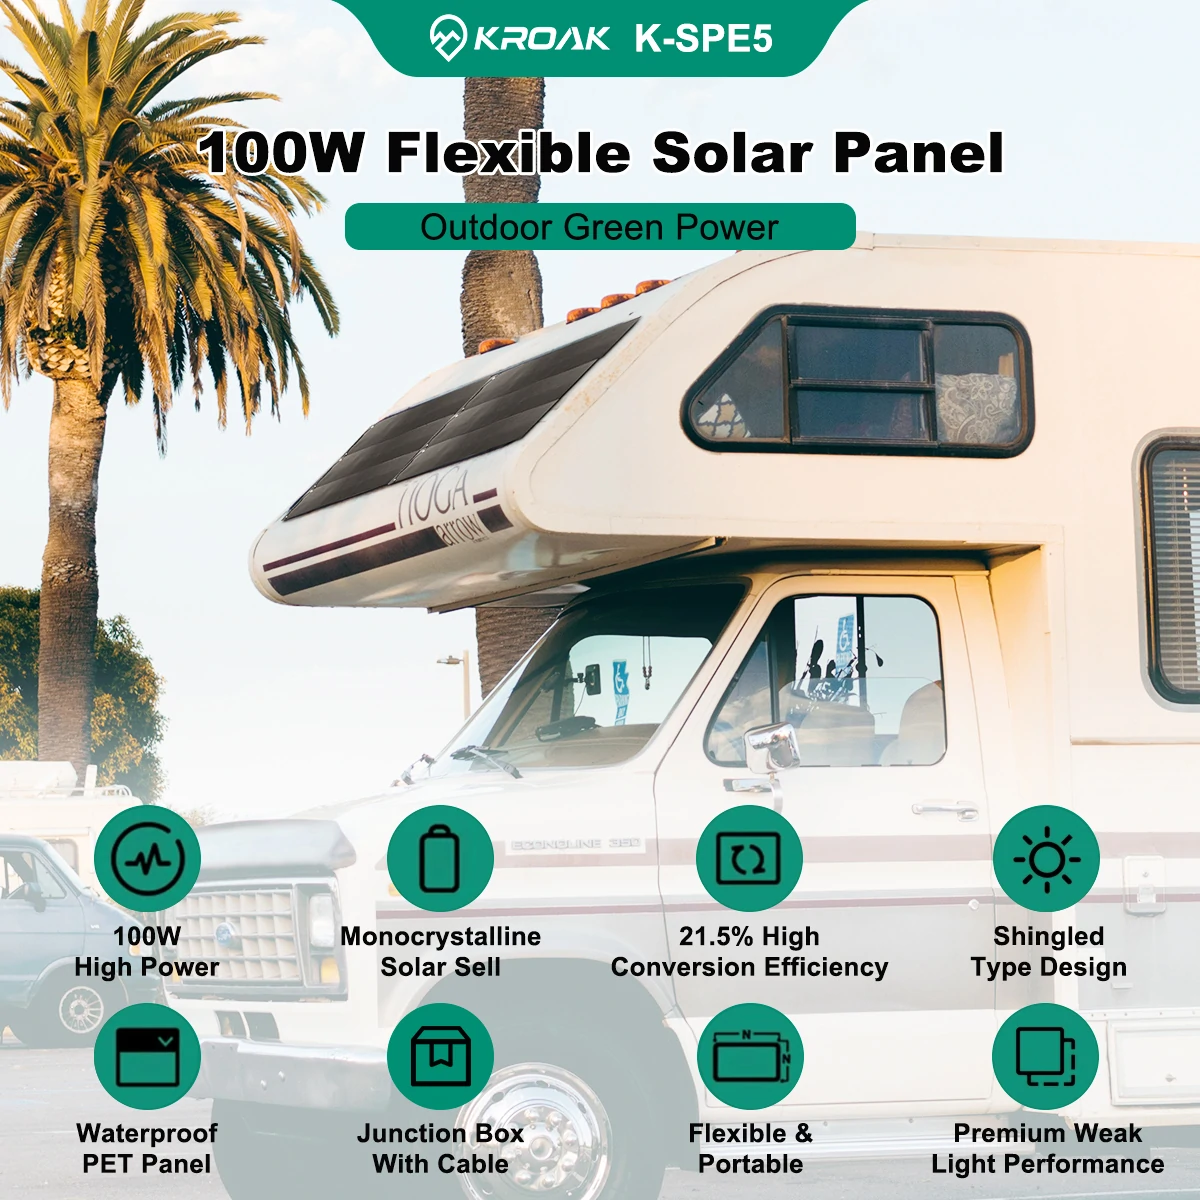 KROAK K-SPE05 100W 18.15V Shingled Solar Panel Semi-Flexible Outdoor Waterproof Portable PV Superior Monocrystalline Solar Power Cell Battery Charger for Car RV Electric Vehicles Yachts